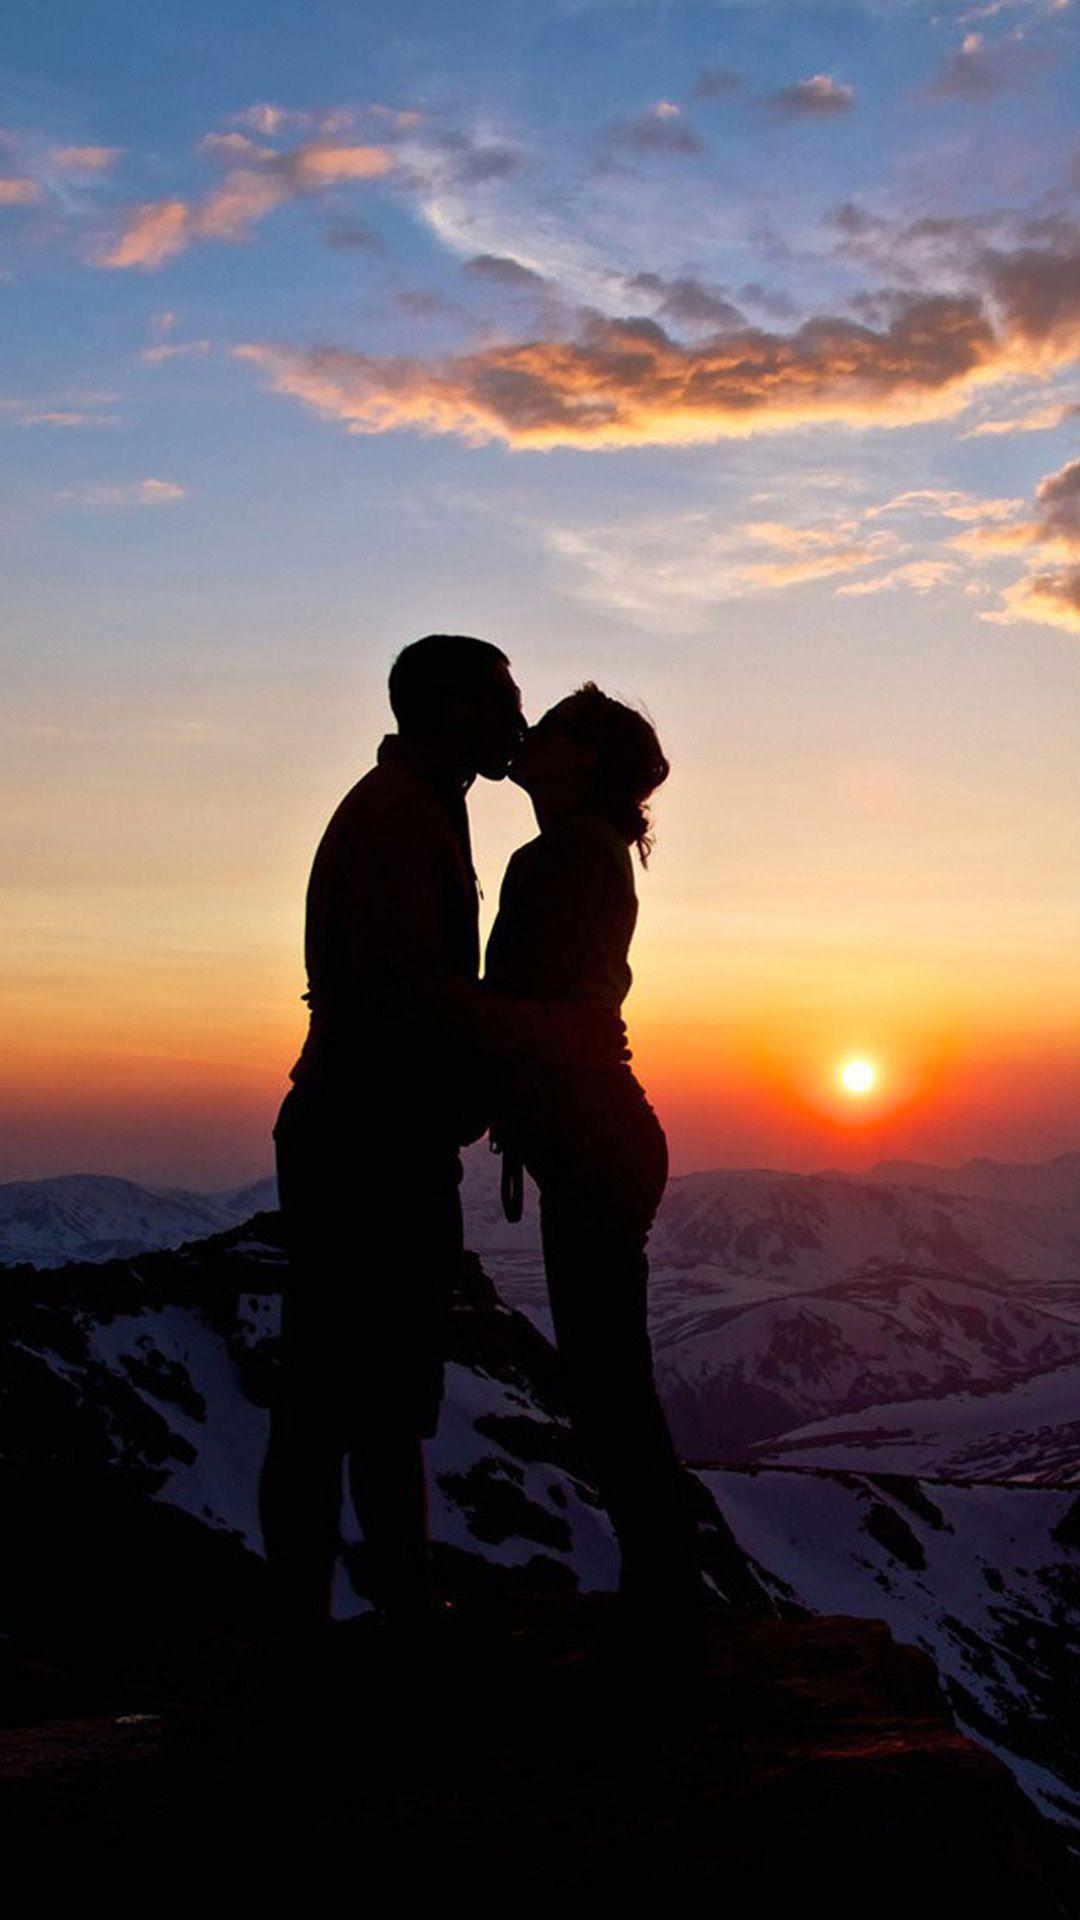 Lover Couple Sunset Snowy Mountain Top Outlines iPhone 8 Wallpaper. Sunset wallpaper, Love wallpaper, Background picture